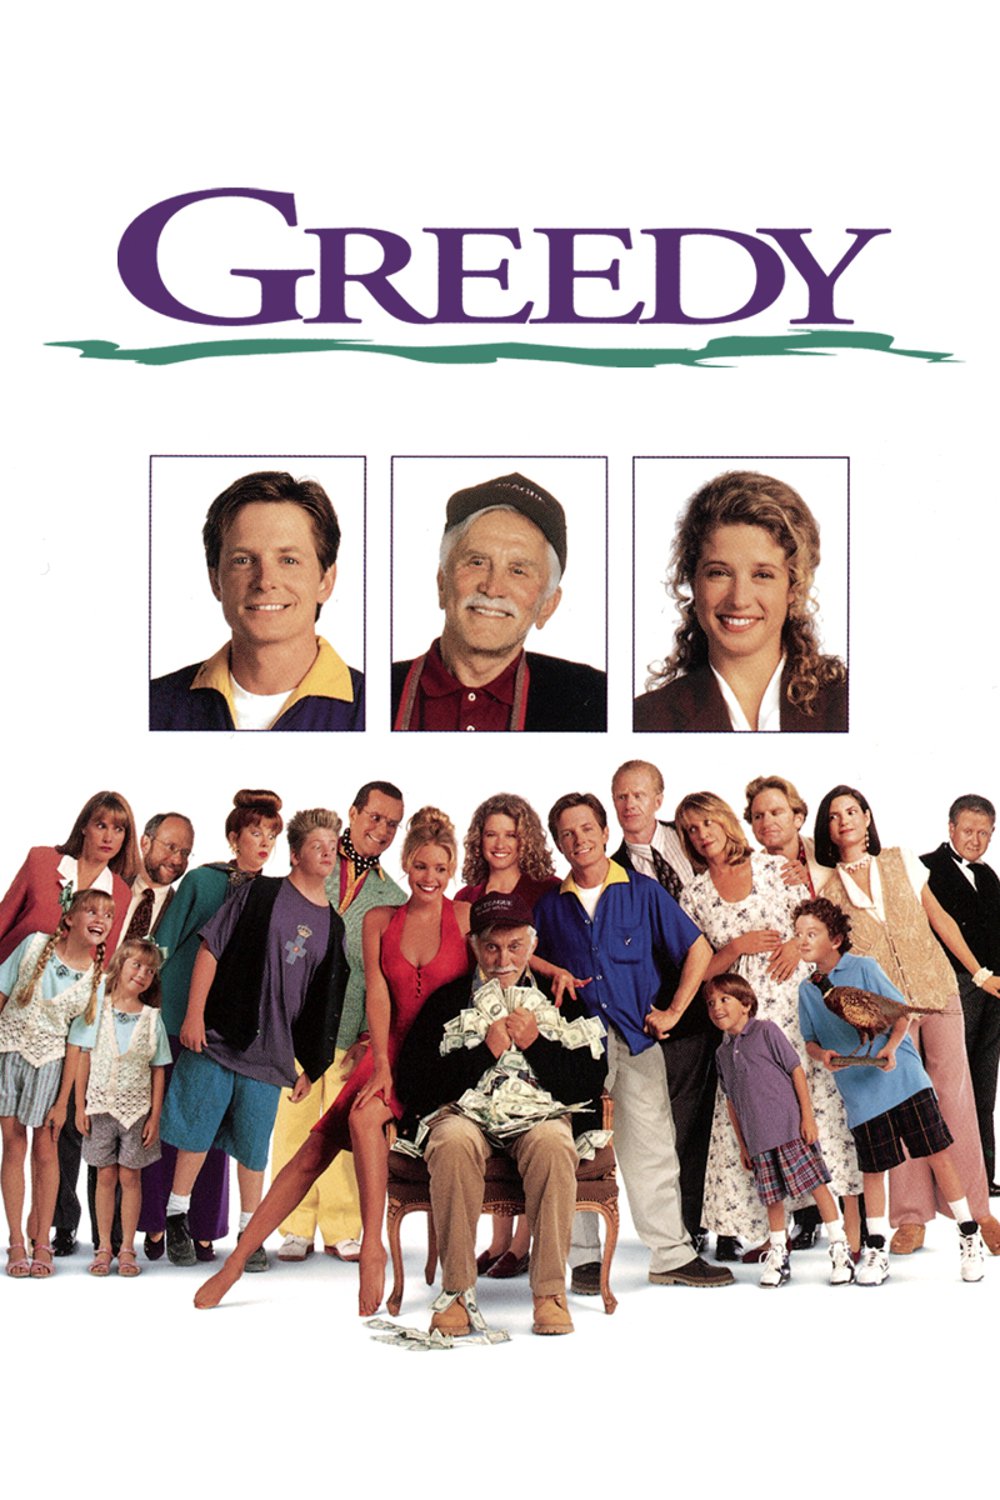 Poster for the movie "Greedy"